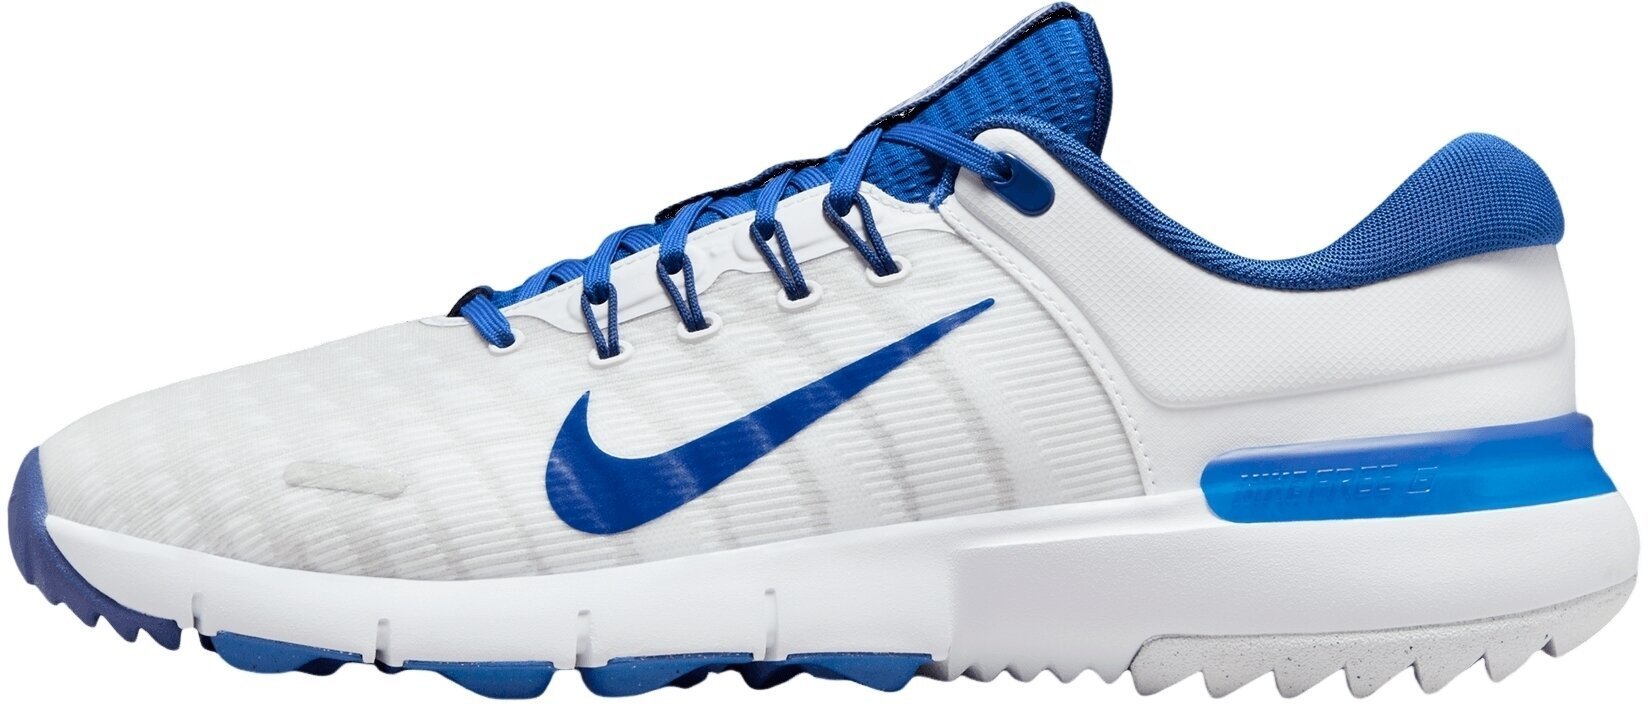 Chaussures de golf pour hommes Nike Free Golf Unisex Shoes Game Royal/Deep Royal Blue/Football Grey 43